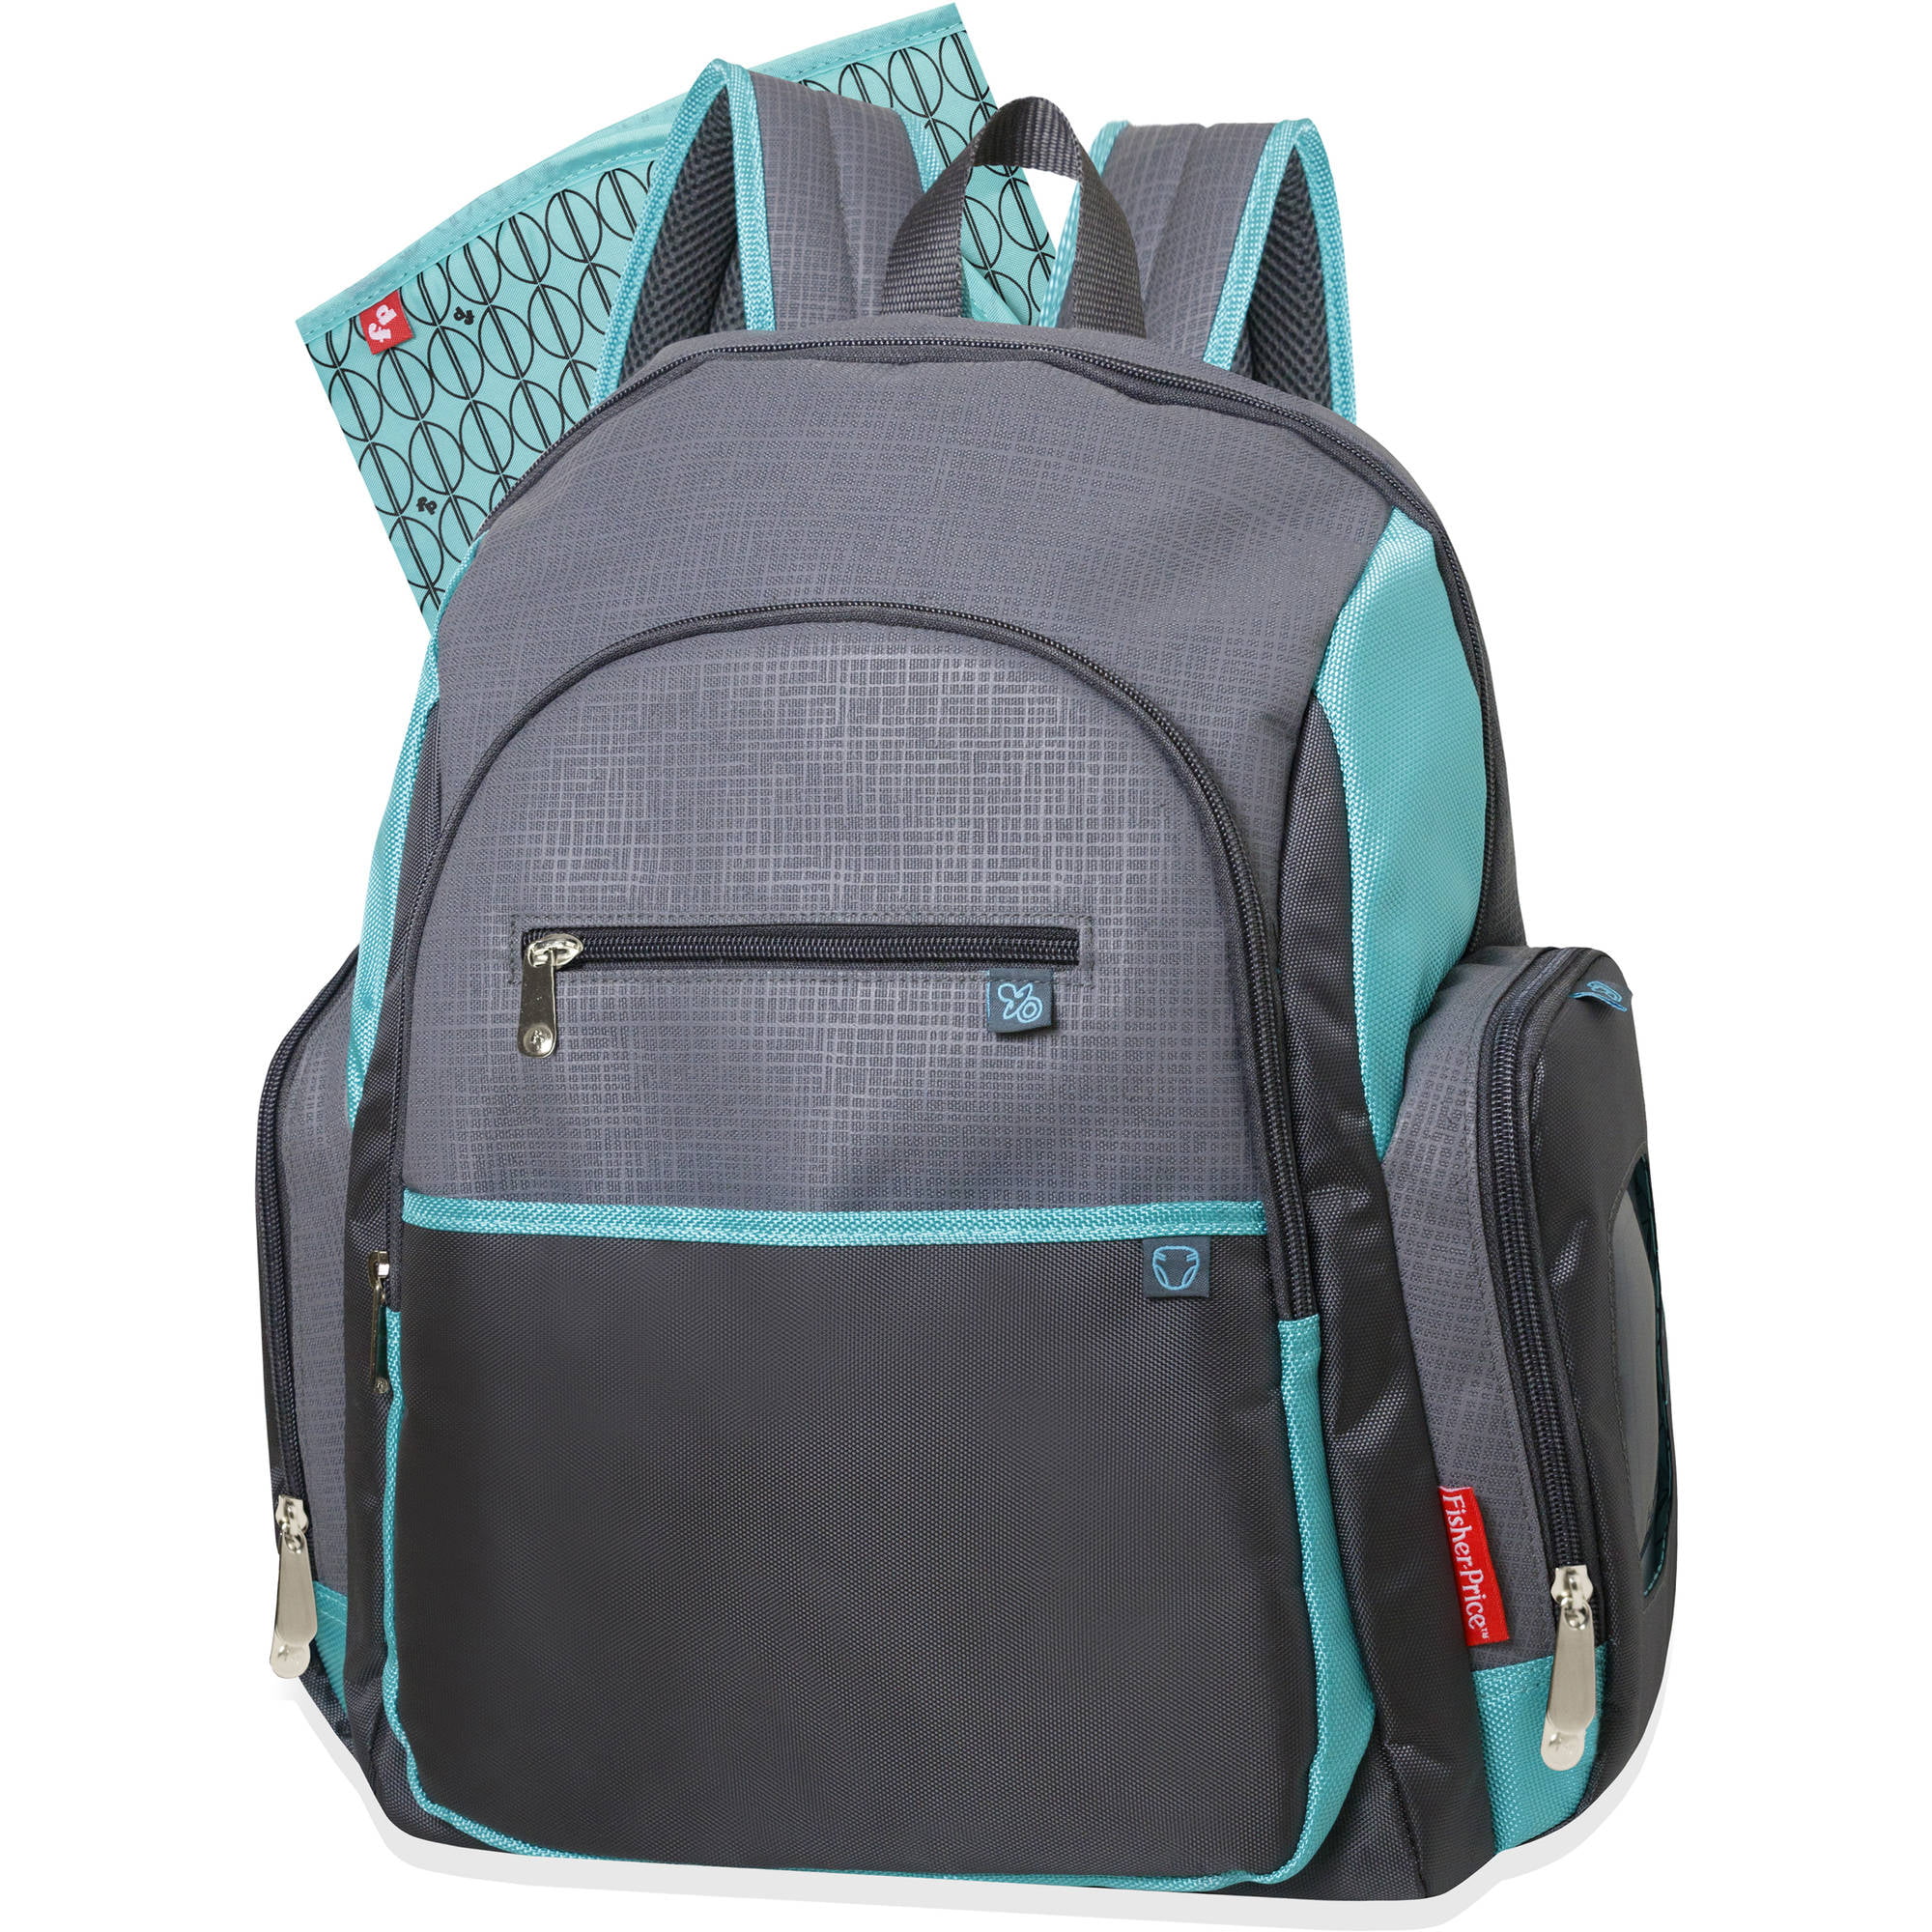 FisherPrice Deluxe Backpack Diaper Bag Gray and Teal